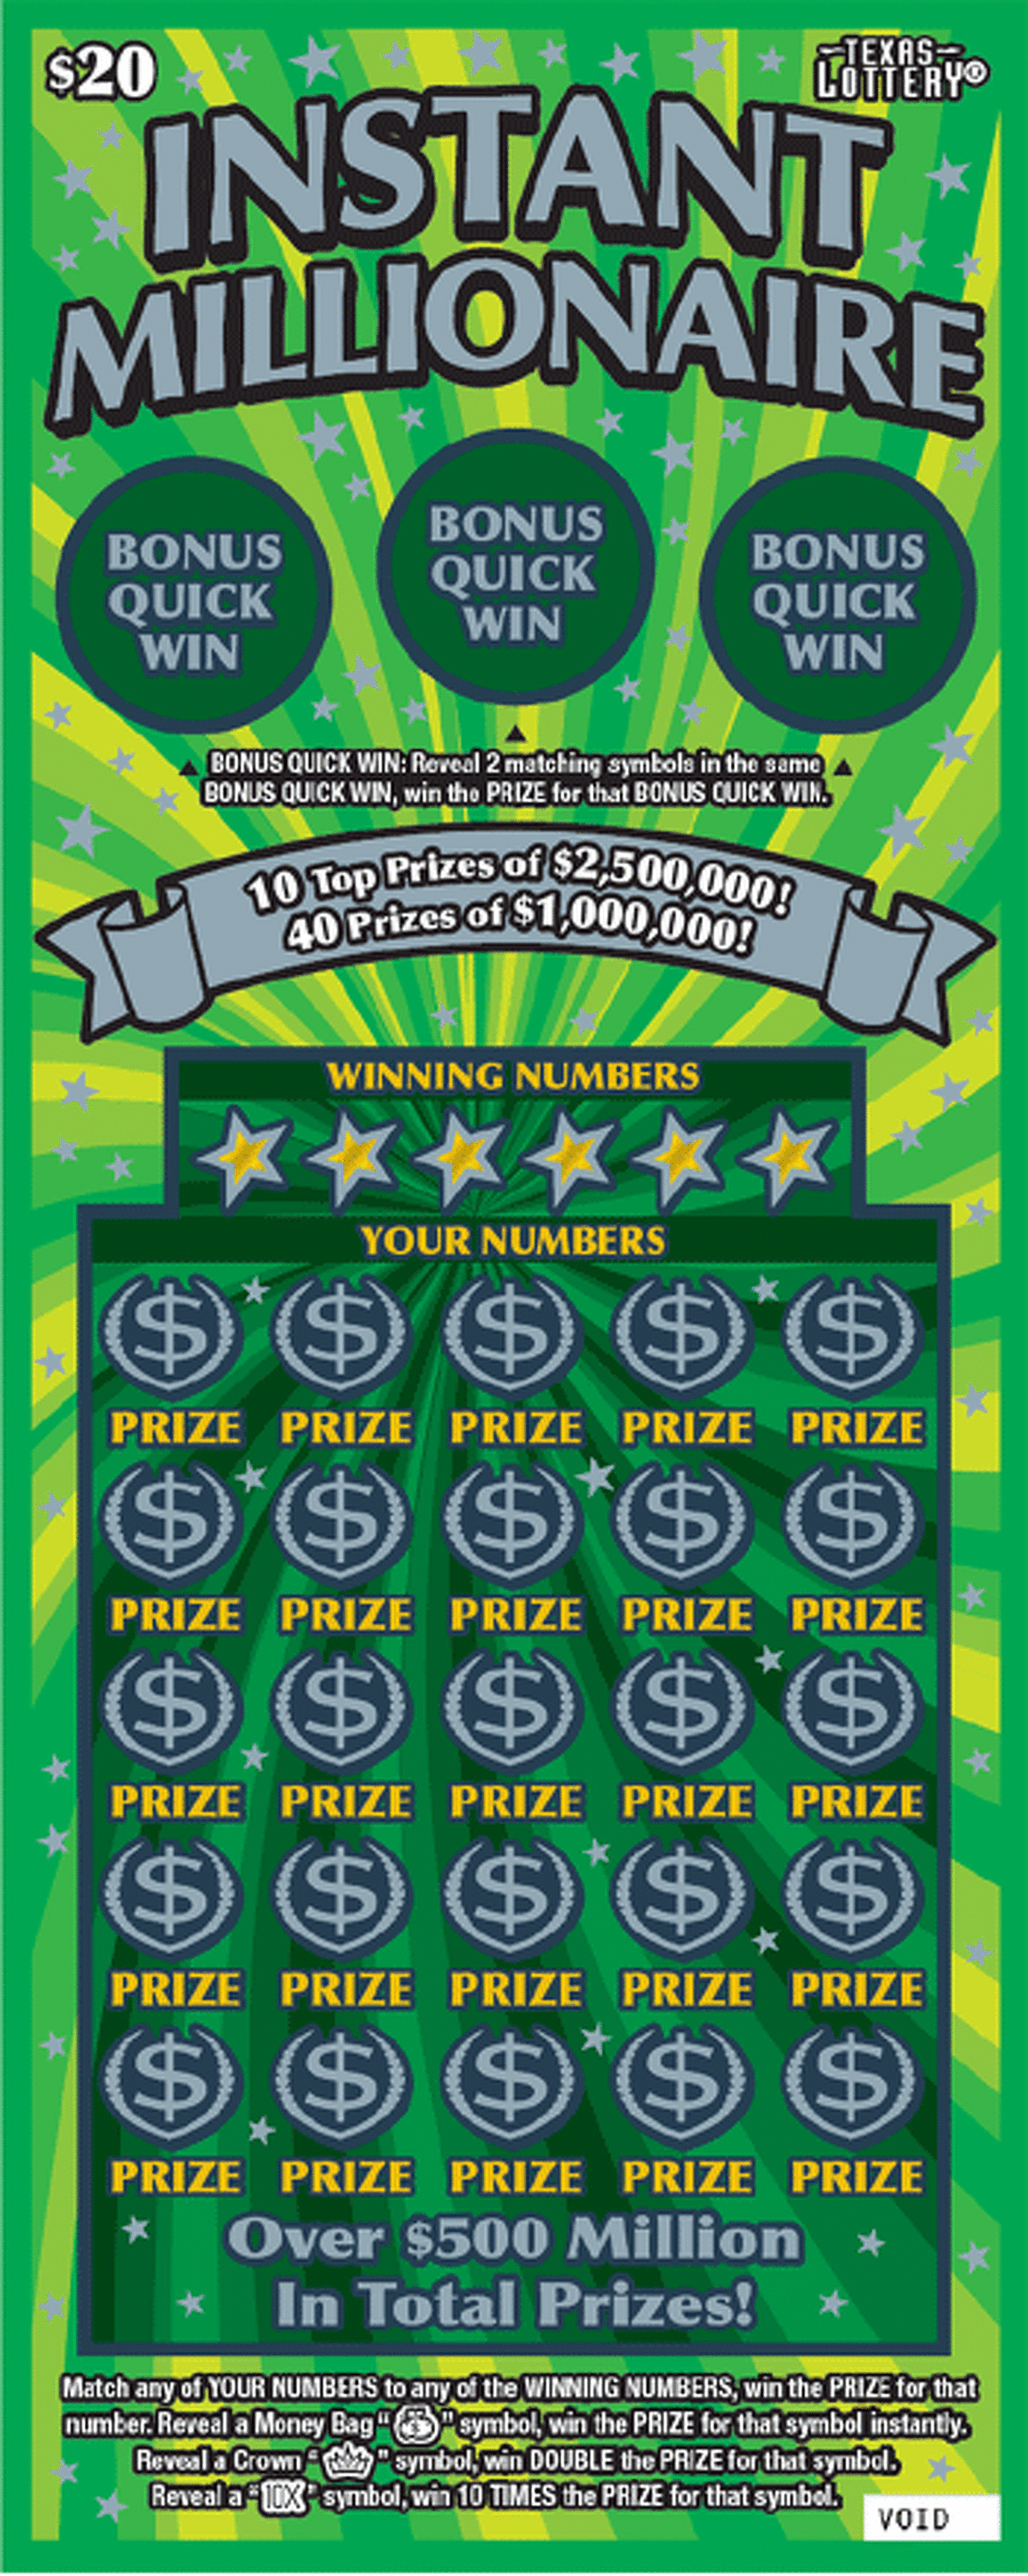 A New Braunfels woman claimed a $1 million prize in the scratch-off ticket game Instant Millionaire, the Texas Lottery Commission announced Tuesday.